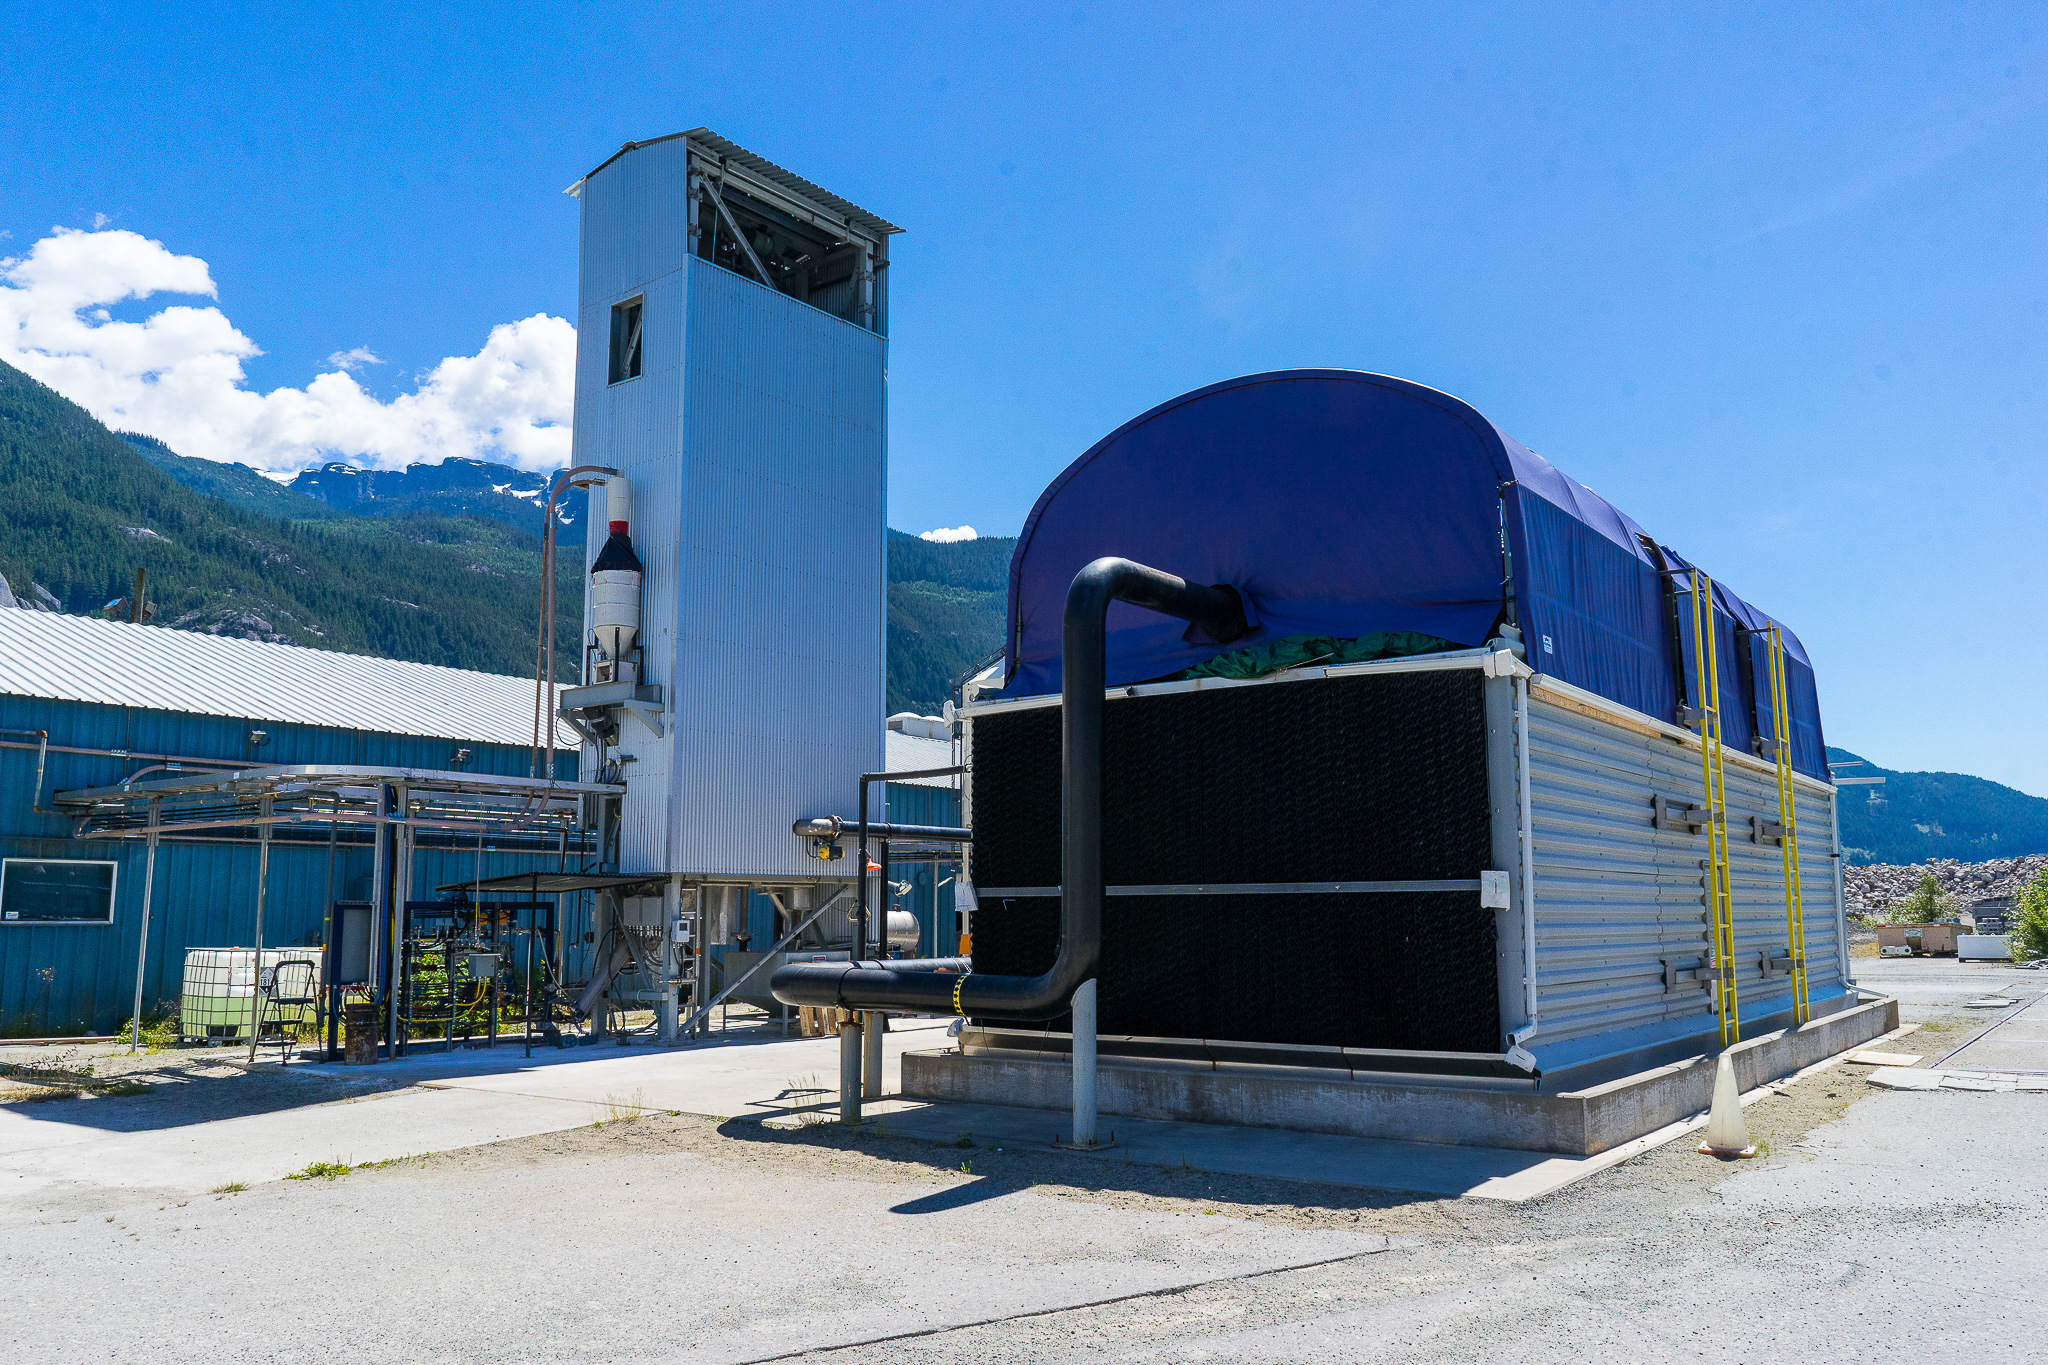 Carbon Engineering's pilot plant in in Squamish, British Columbia, is designed to pull CO2 out of the atmosphere. (Courtesy Carbon Engineering Ltd.)